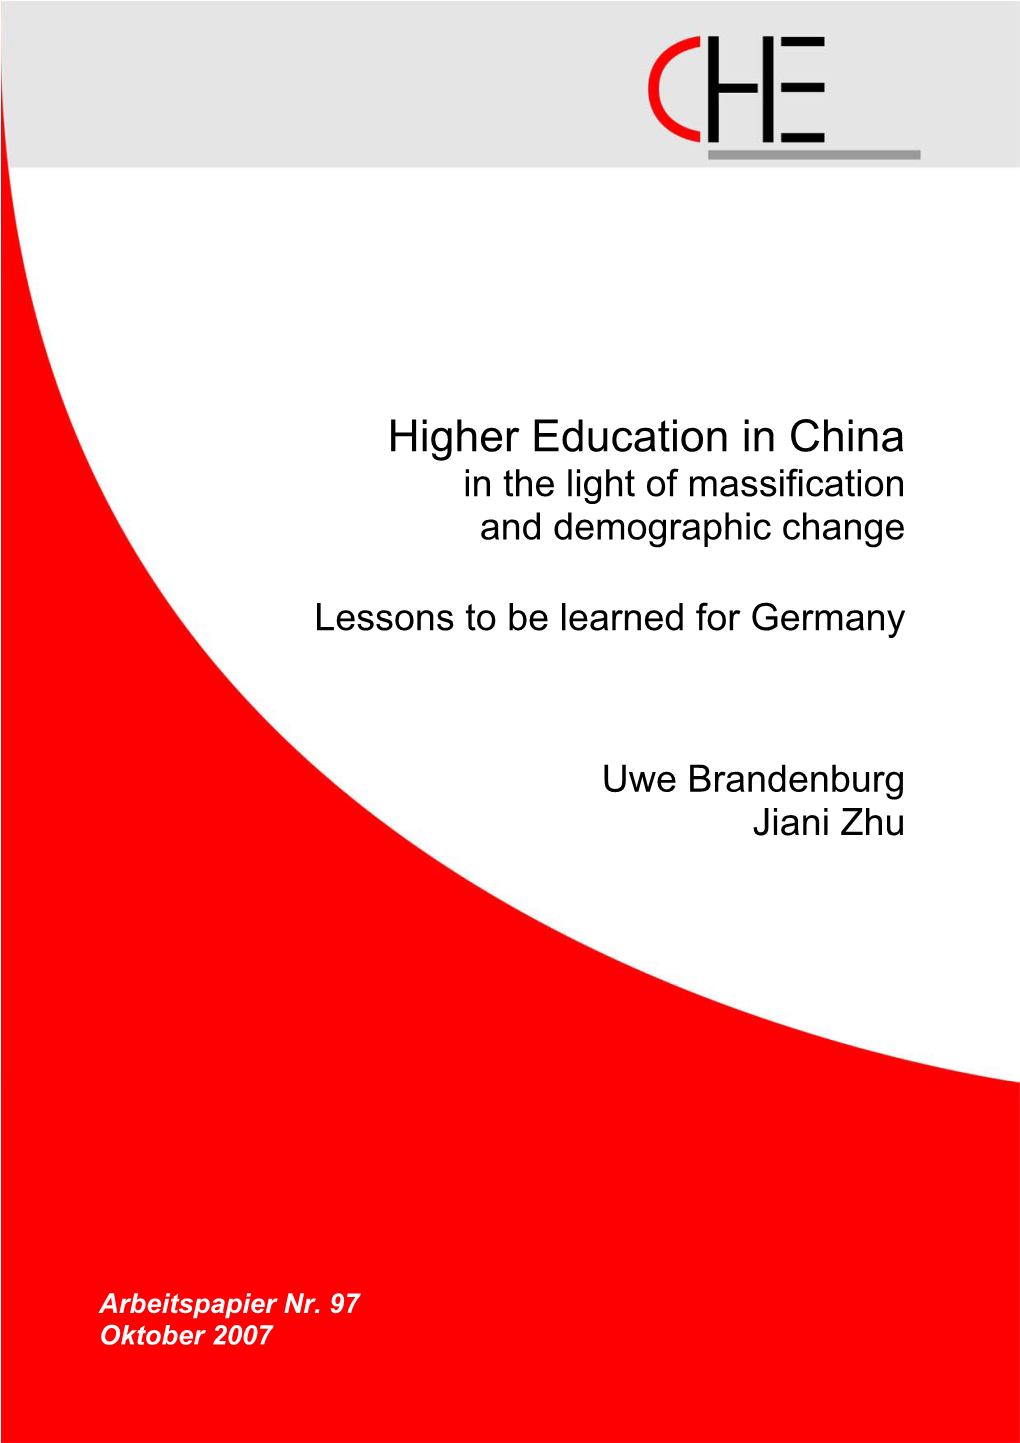 Higher Education in China in the Light of Massification and Demographic Change